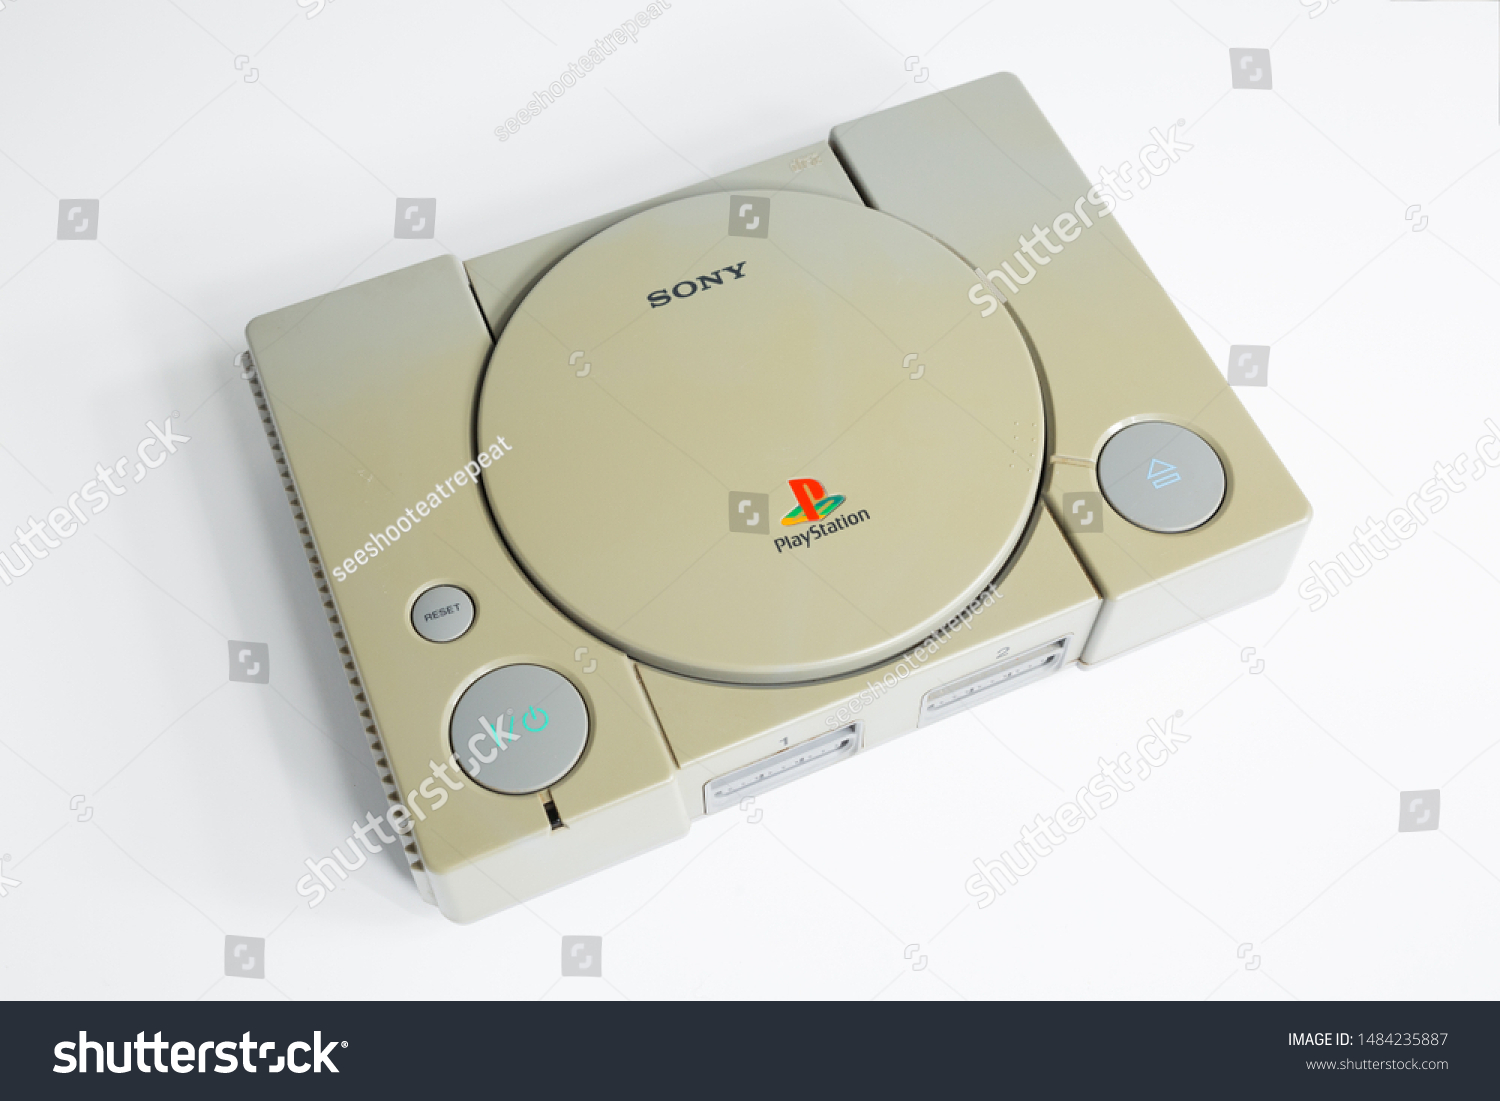 sony playstation old